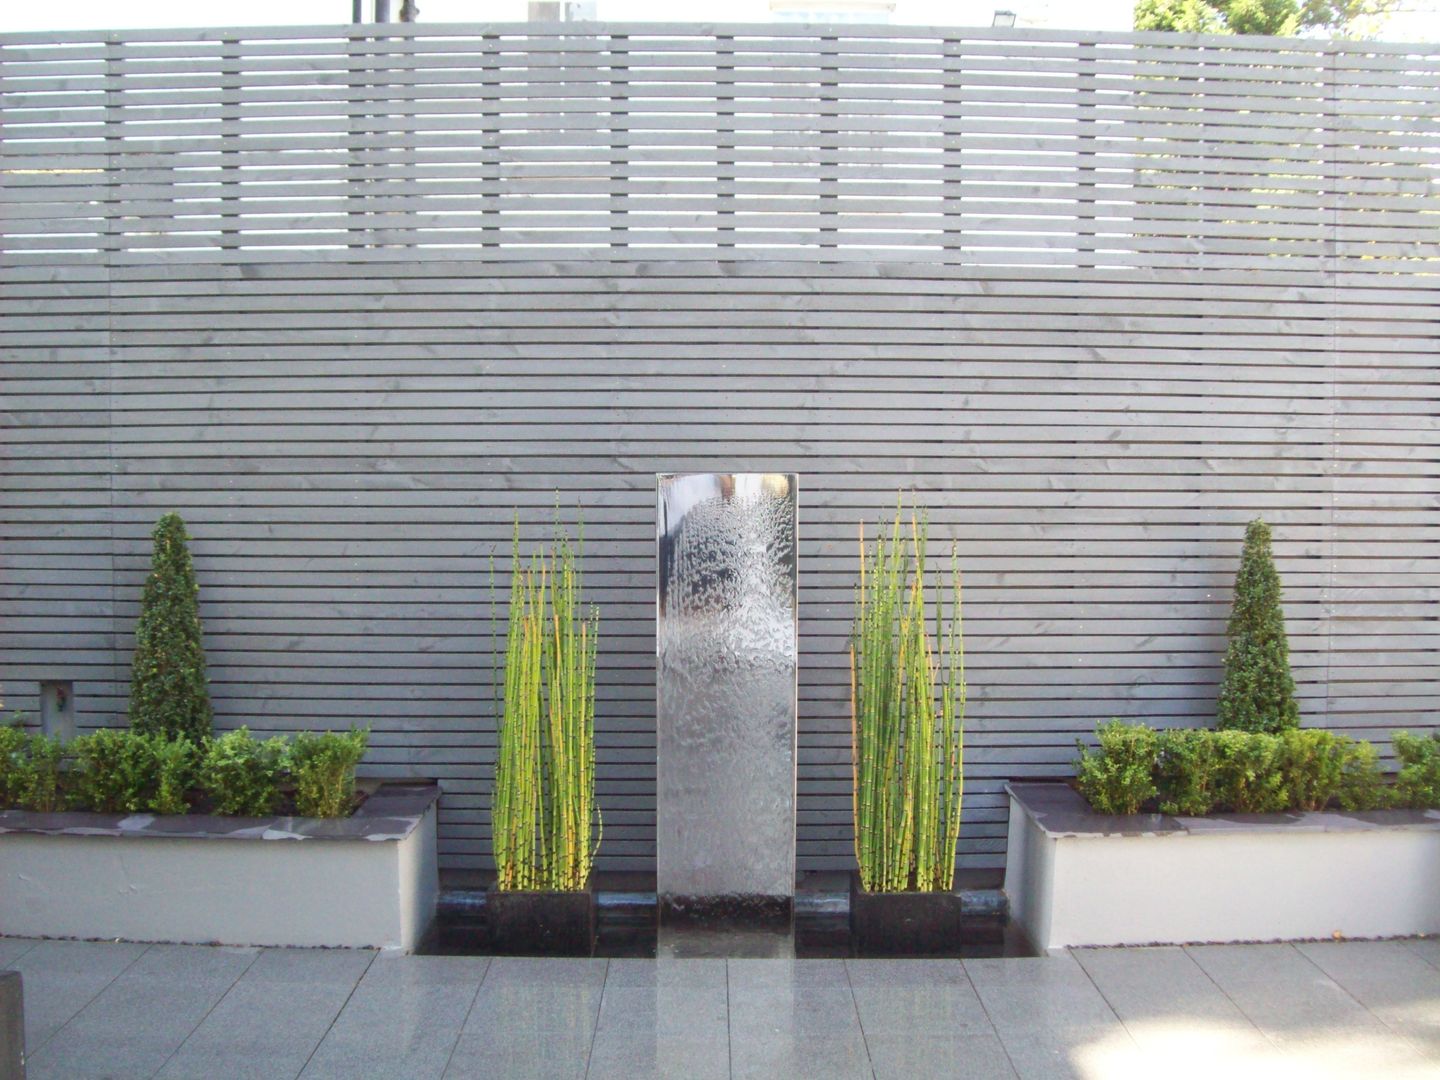 Stainless Steel Metal Water Feature Unique Landscapes 庭院